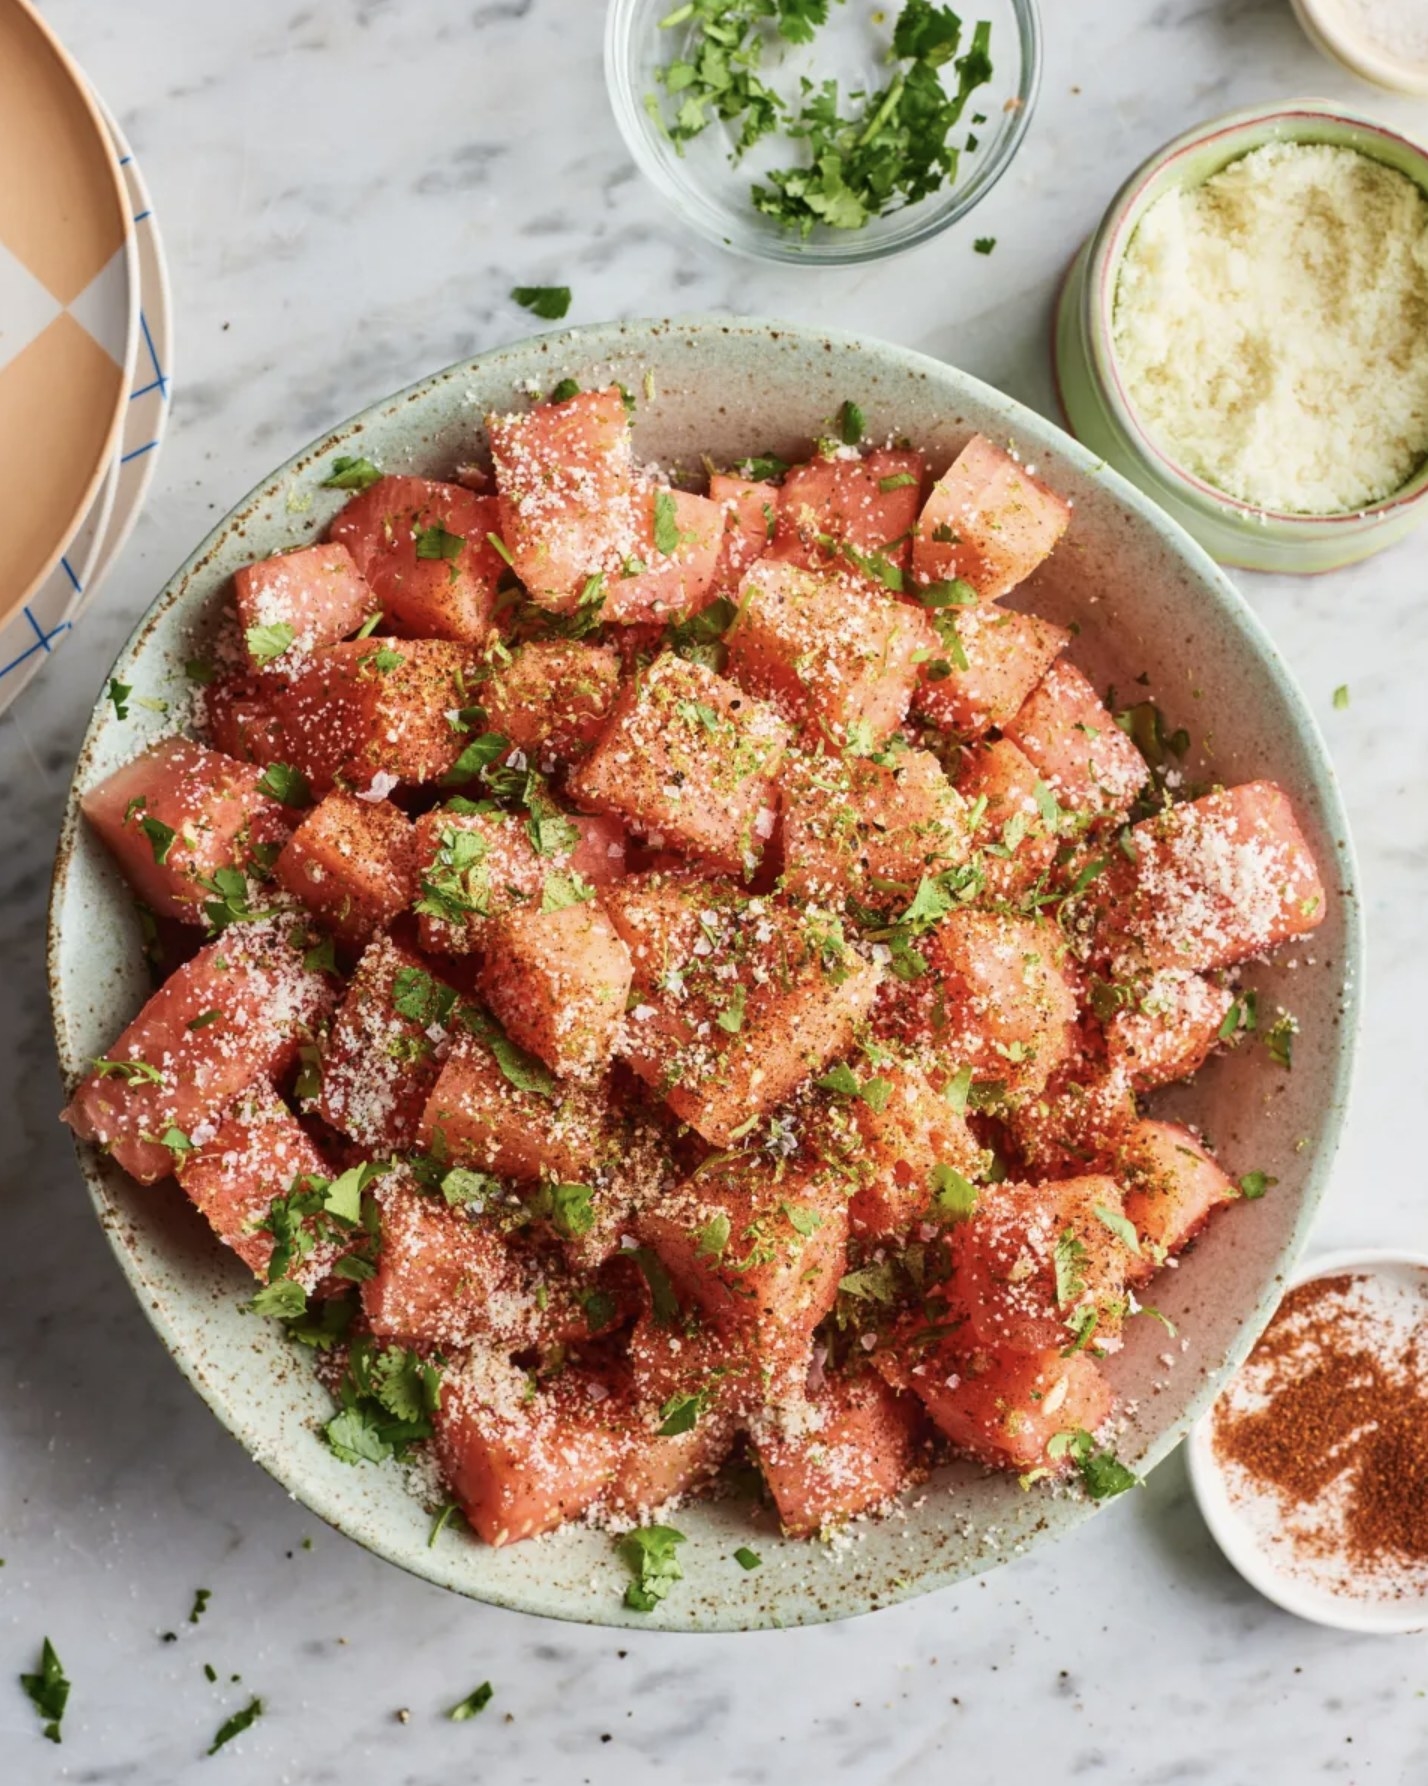 A bowl of watermelon cubes topped with chili powder, cheese, and fresh herbs, with additional garnishes in small bowls nearby